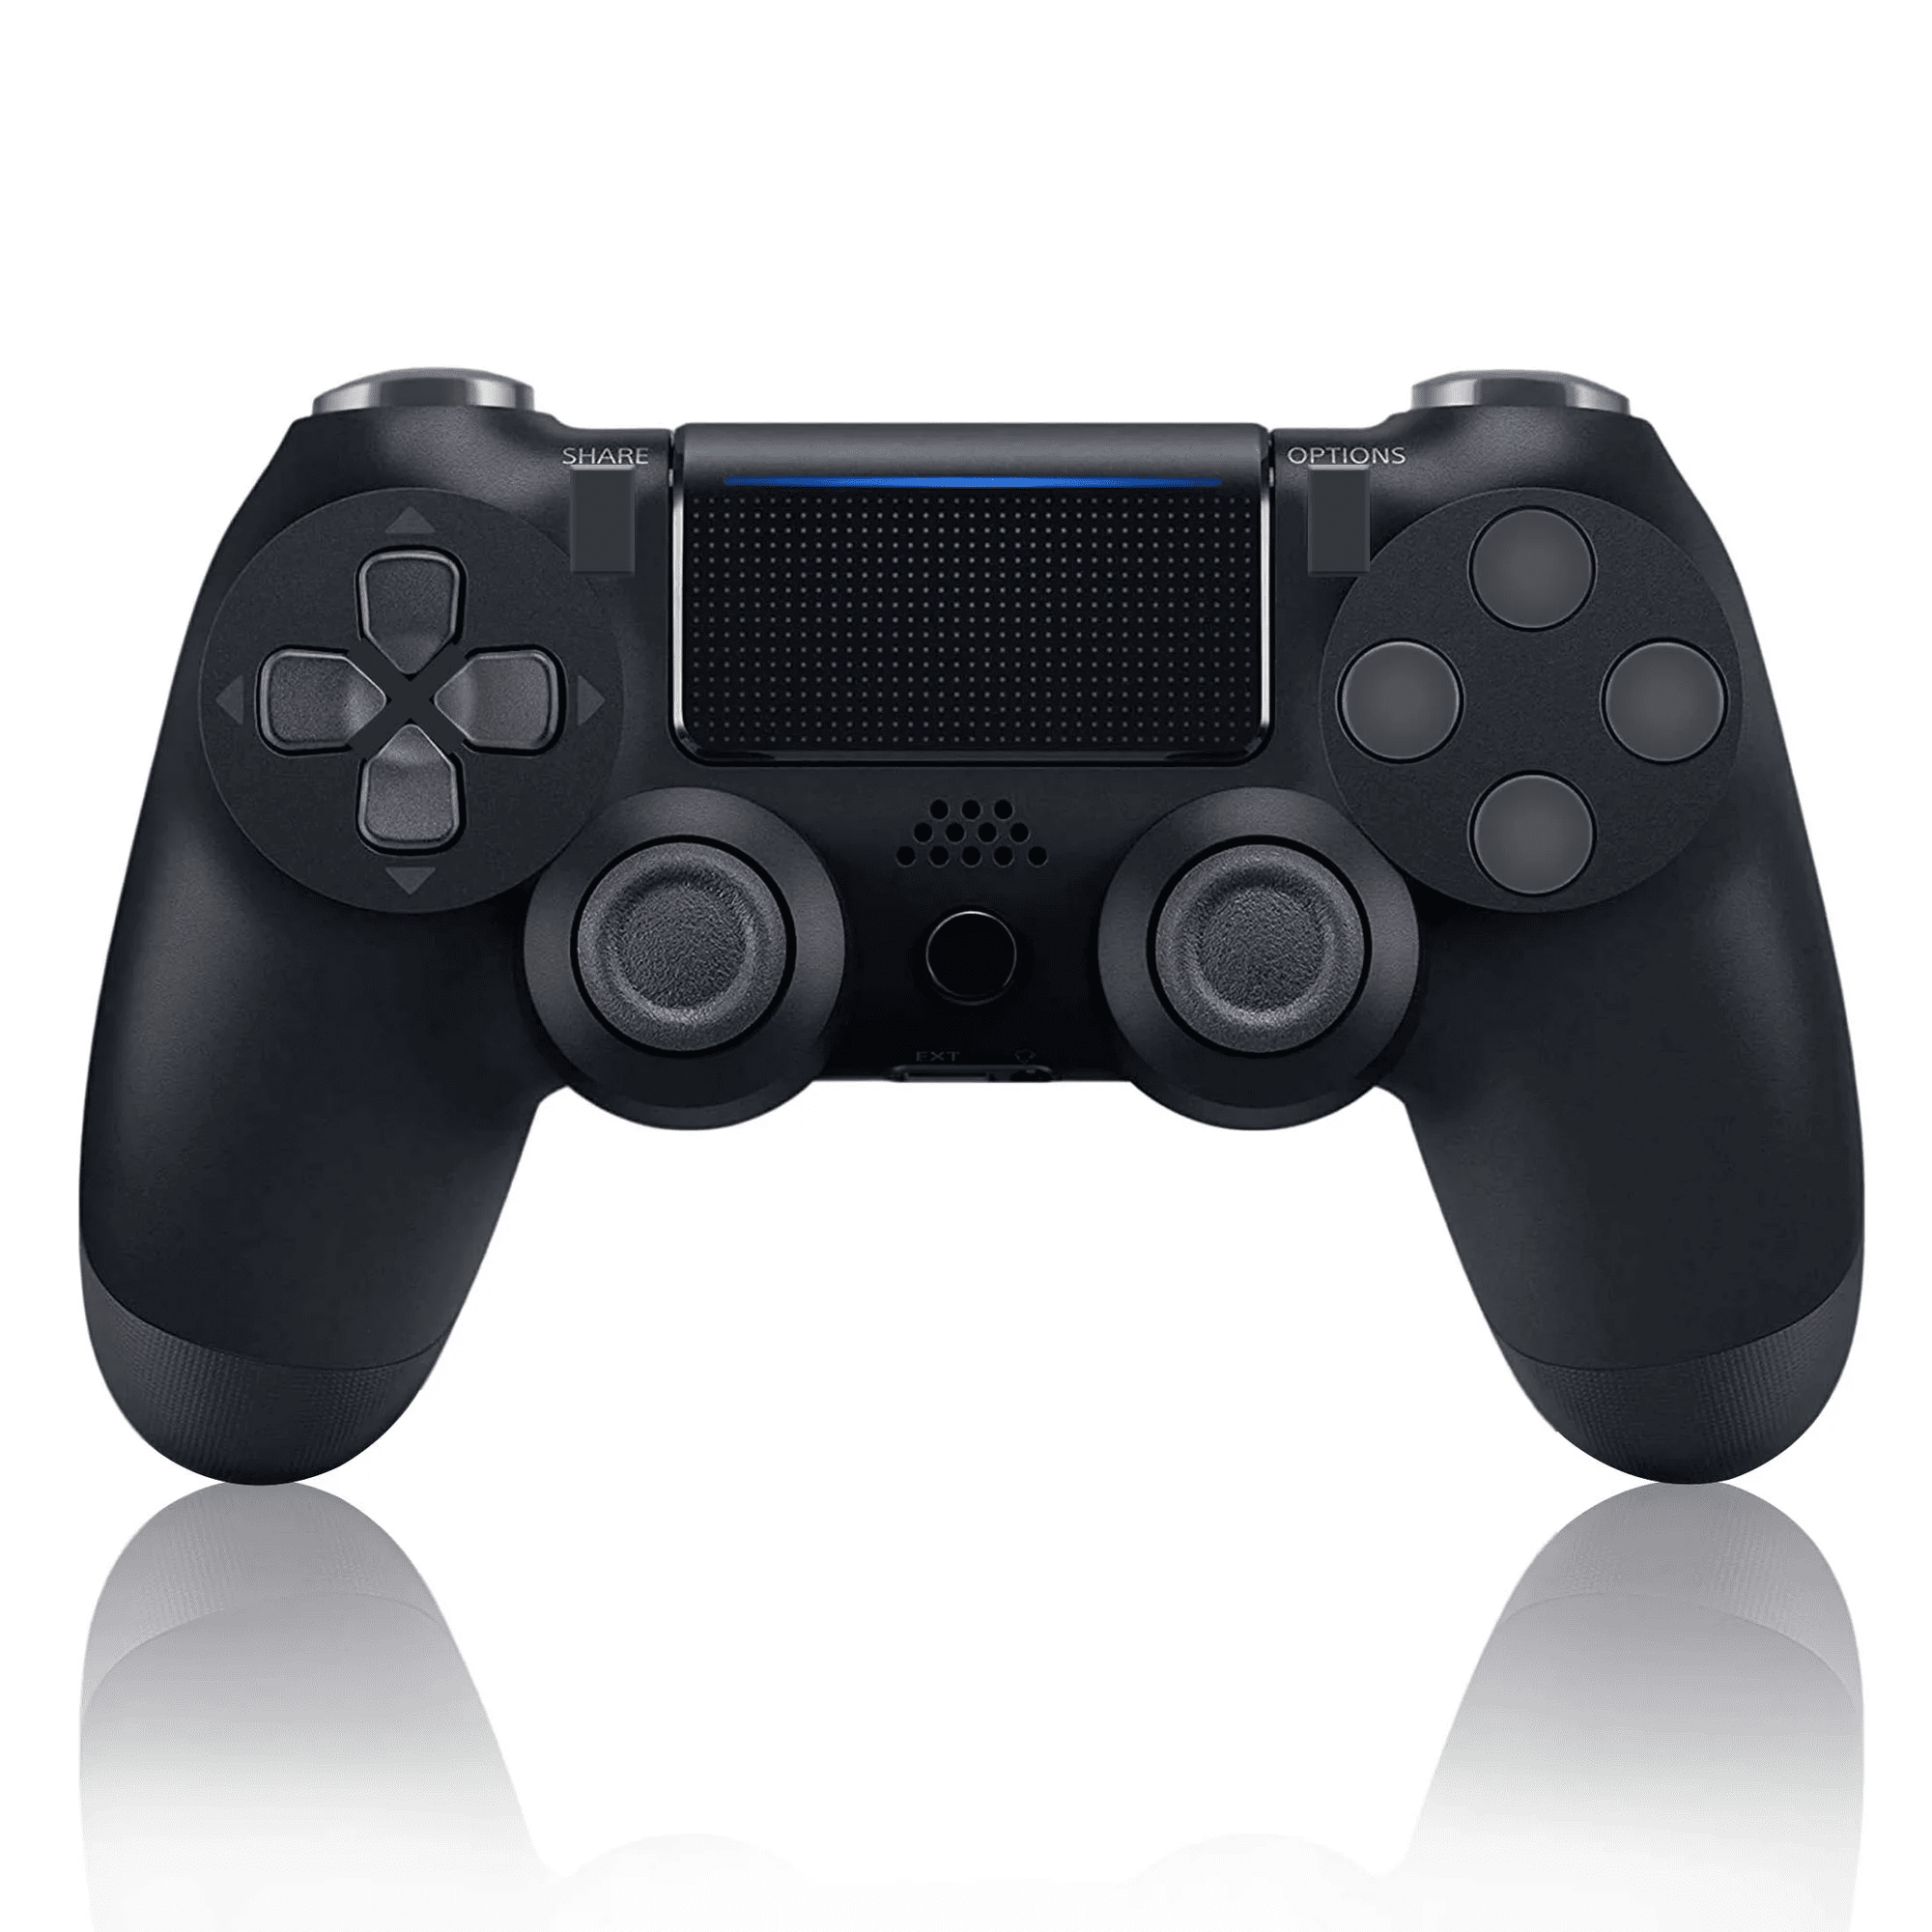 Scharnier vooroordeel Onrustig PS4 Controller Wireless for PS4/Pro/Slim/PC,Bluetooth Gamepad Remote  Joystick with Double Shock/Touchpad/Stereo Headphone Jack/Six-axis  Motion,Black - Walmart.com